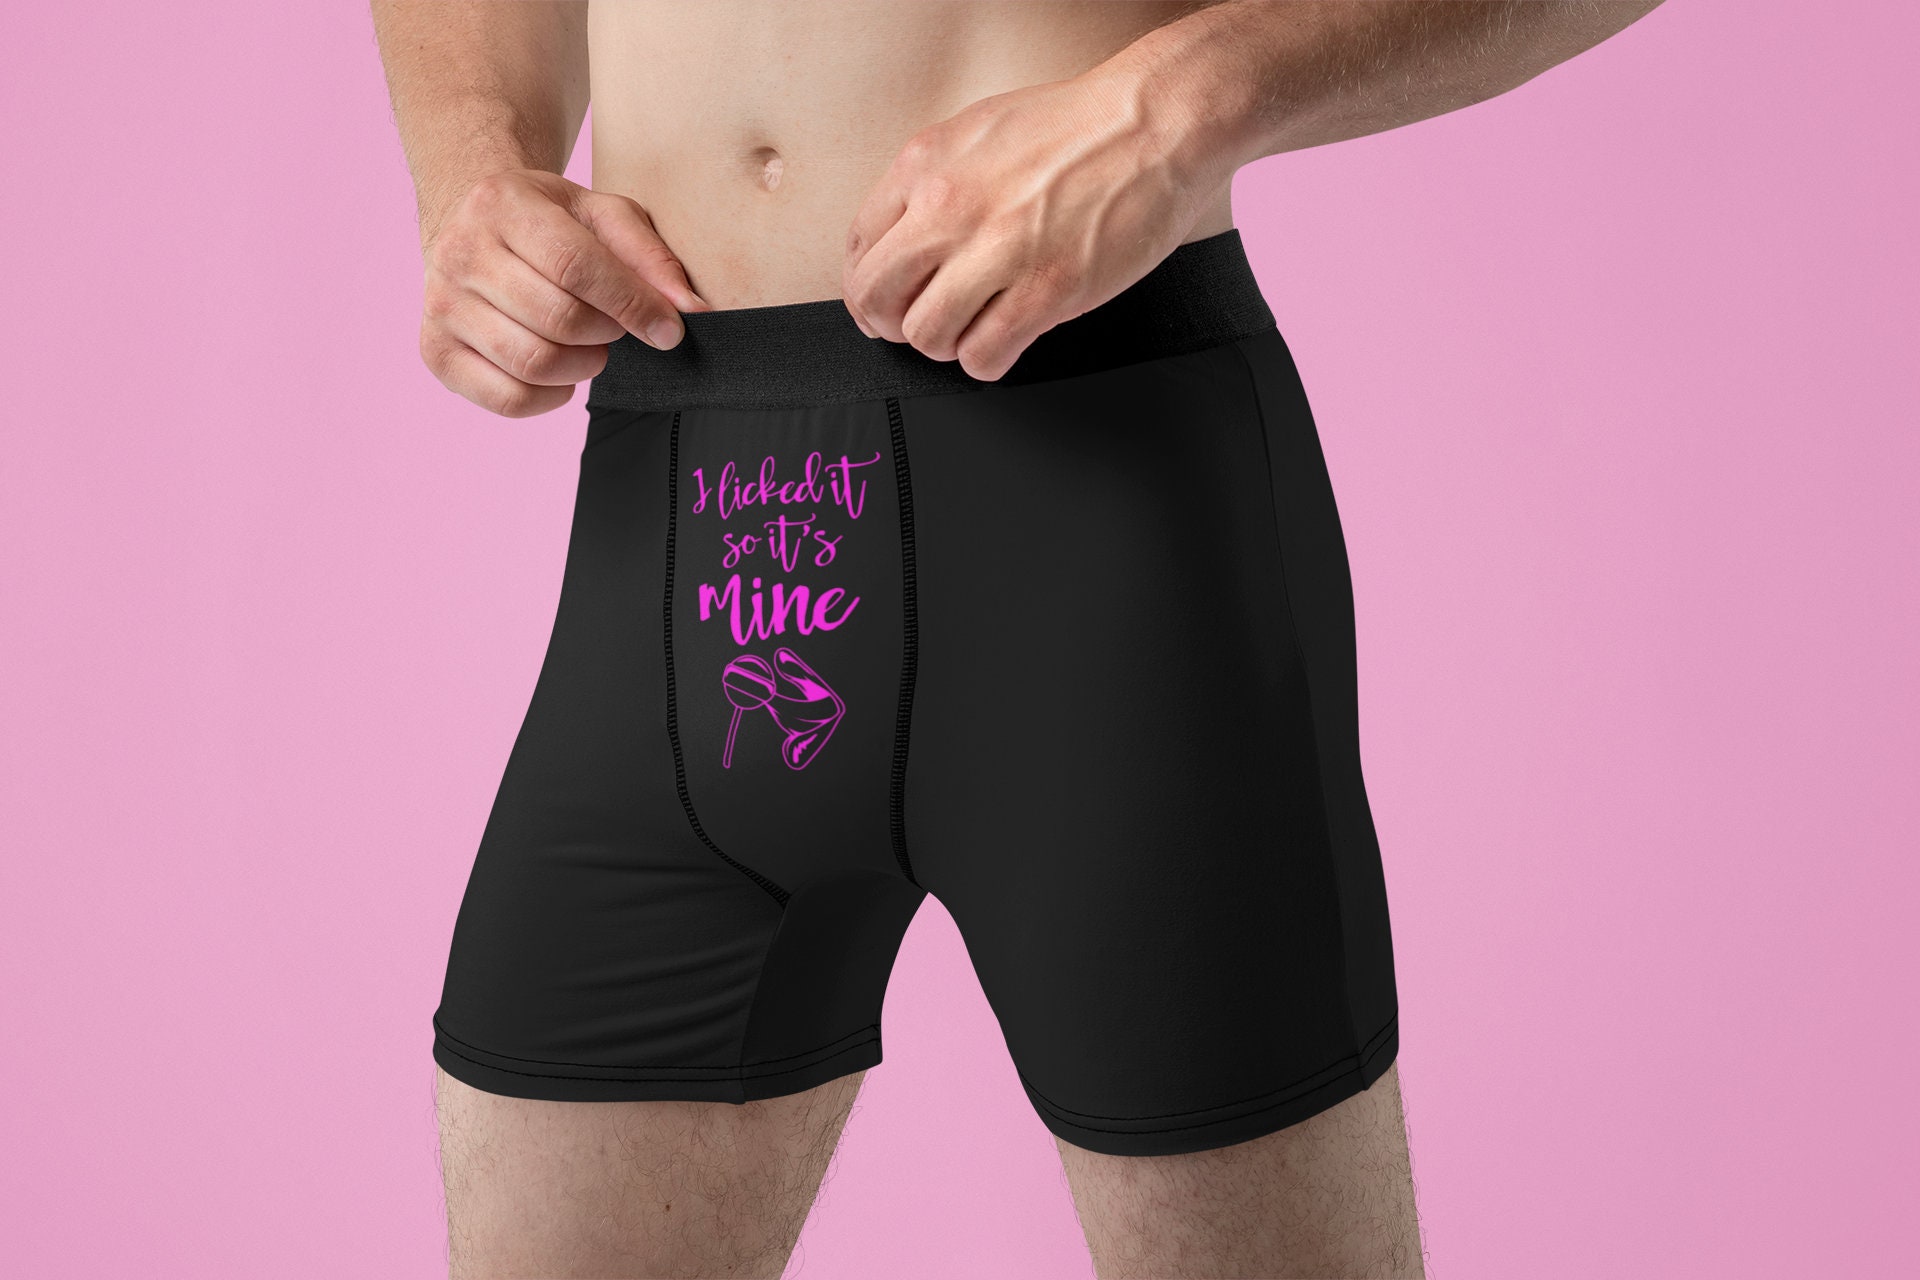 This 'Sexy' Men's Underwear Will Give You Strange Feelings